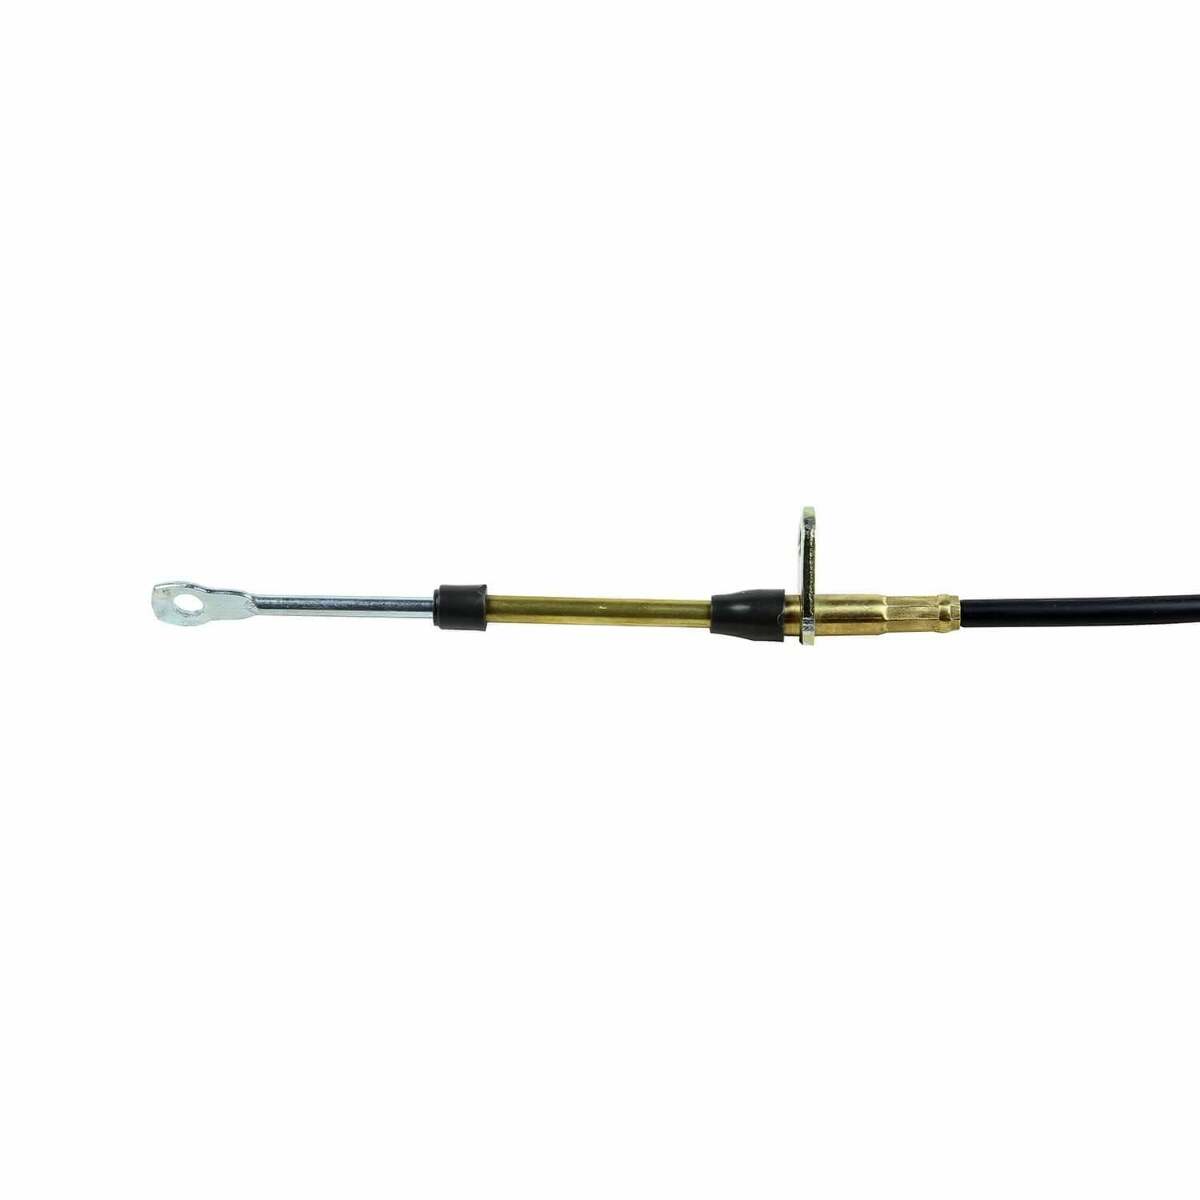 B&M PERFORMANCE SHIFTER CABLE 5-FOOT LENGTH - BLACK - 81605